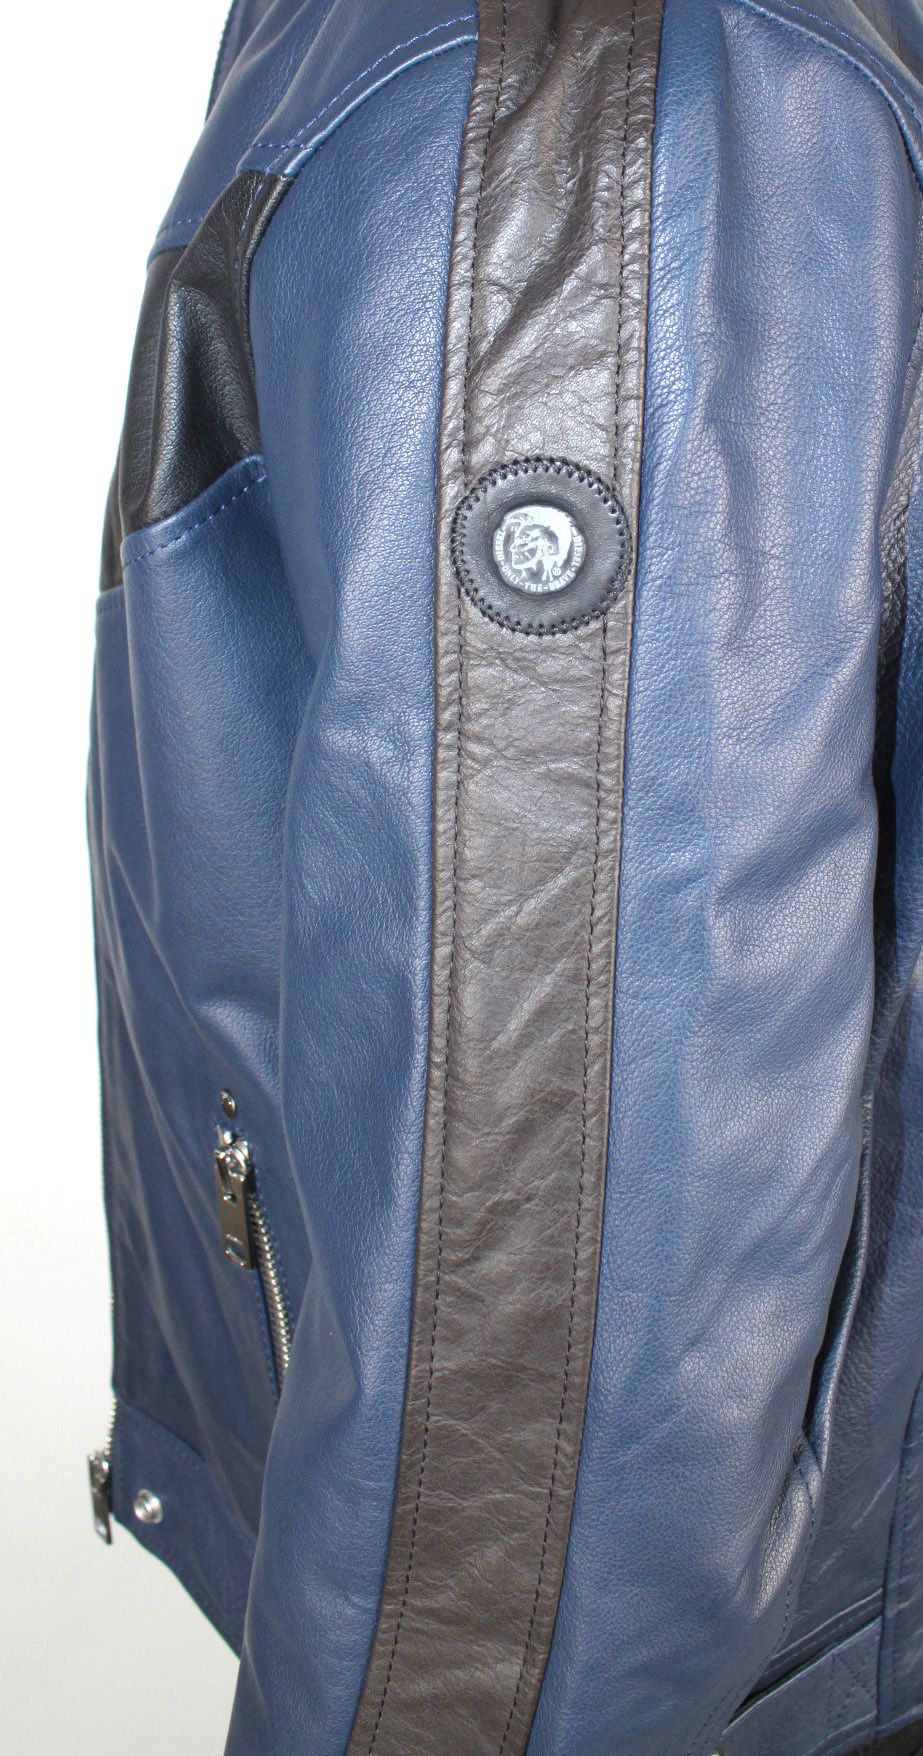 Diesel L-Reed 81EA Leather Jacket. Soft Blue Leather Jacket. Central Zip Closure. 100% Buffalo Hide. Navy With Black Contrast. Zipped Cuffs